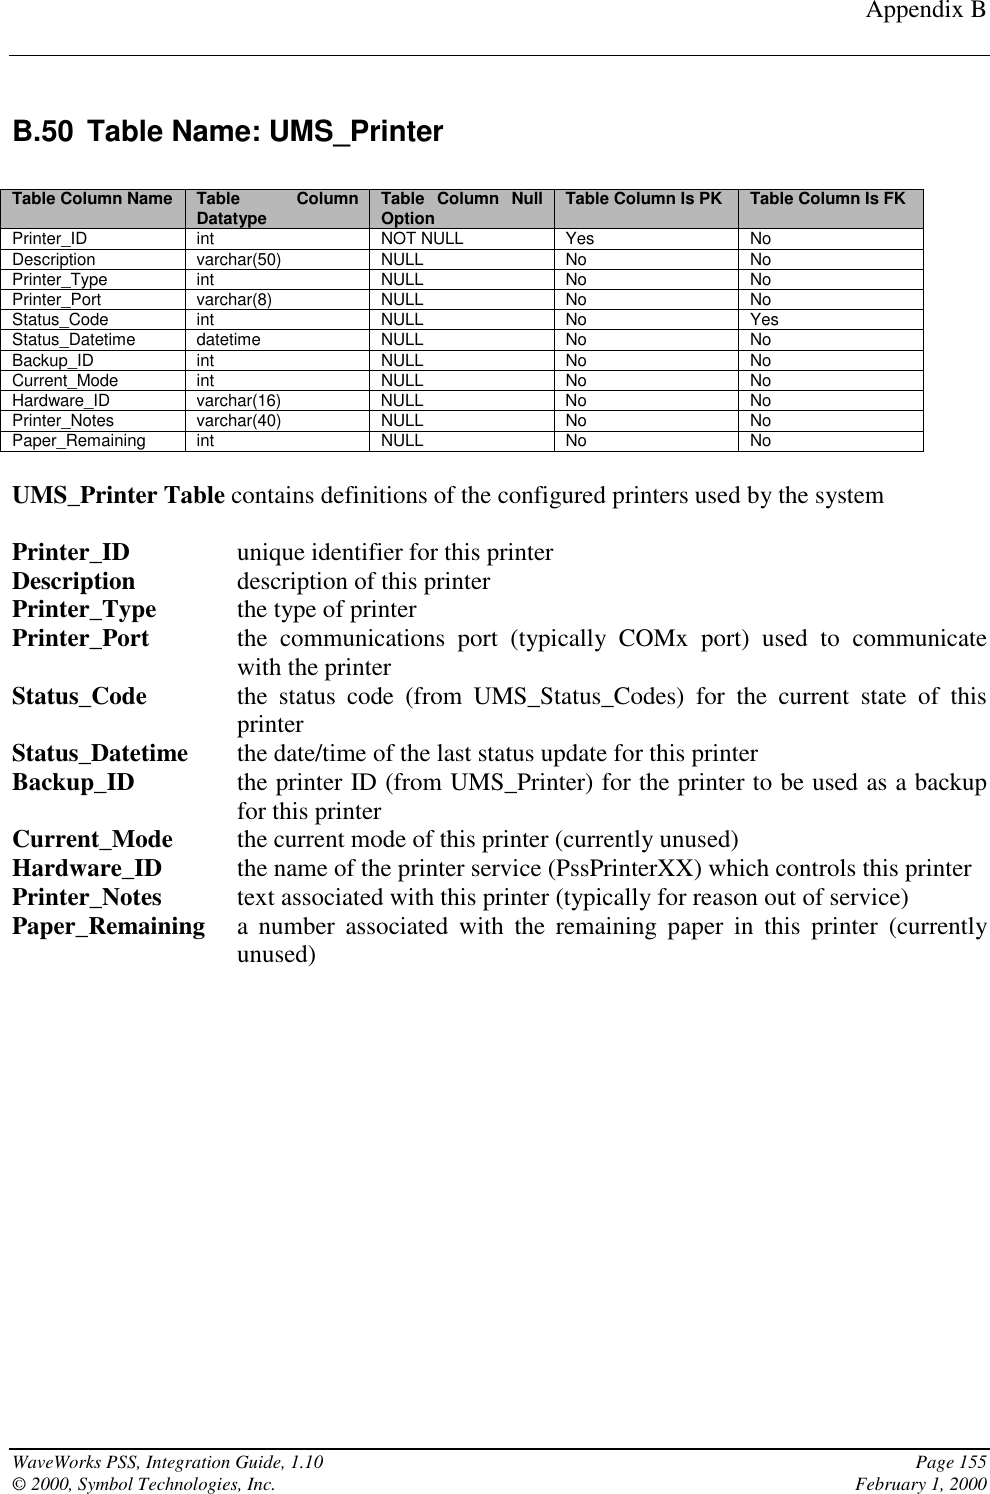 Appendix BWaveWorks PSS, Integration Guide, 1.10 Page 155© 2000, Symbol Technologies, Inc. February 1, 2000B.50 Table Name: UMS_PrinterTable Column Name Table ColumnDatatype Table Column NullOption Table Column Is PK Table Column Is FKPrinter_ID int NOT NULL Yes NoDescription varchar(50) NULL No NoPrinter_Type int NULL No NoPrinter_Port varchar(8) NULL No NoStatus_Code int NULL No YesStatus_Datetime datetime NULL No NoBackup_ID int NULL No NoCurrent_Mode int NULL No NoHardware_ID varchar(16) NULL No NoPrinter_Notes varchar(40) NULL No NoPaper_Remaining int NULL No NoUMS_Printer Table contains definitions of the configured printers used by the systemPrinter_ID unique identifier for this printerDescription description of this printerPrinter_Type the type of printerPrinter_Port the communications port (typically COMx port) used to communicatewith the printerStatus_Code the status code (from UMS_Status_Codes) for the current state of thisprinterStatus_Datetime the date/time of the last status update for this printerBackup_ID the printer ID (from UMS_Printer) for the printer to be used as a backupfor this printerCurrent_Mode the current mode of this printer (currently unused)Hardware_ID the name of the printer service (PssPrinterXX) which controls this printerPrinter_Notes text associated with this printer (typically for reason out of service)Paper_Remaining a number associated with the remaining paper in this printer (currentlyunused)